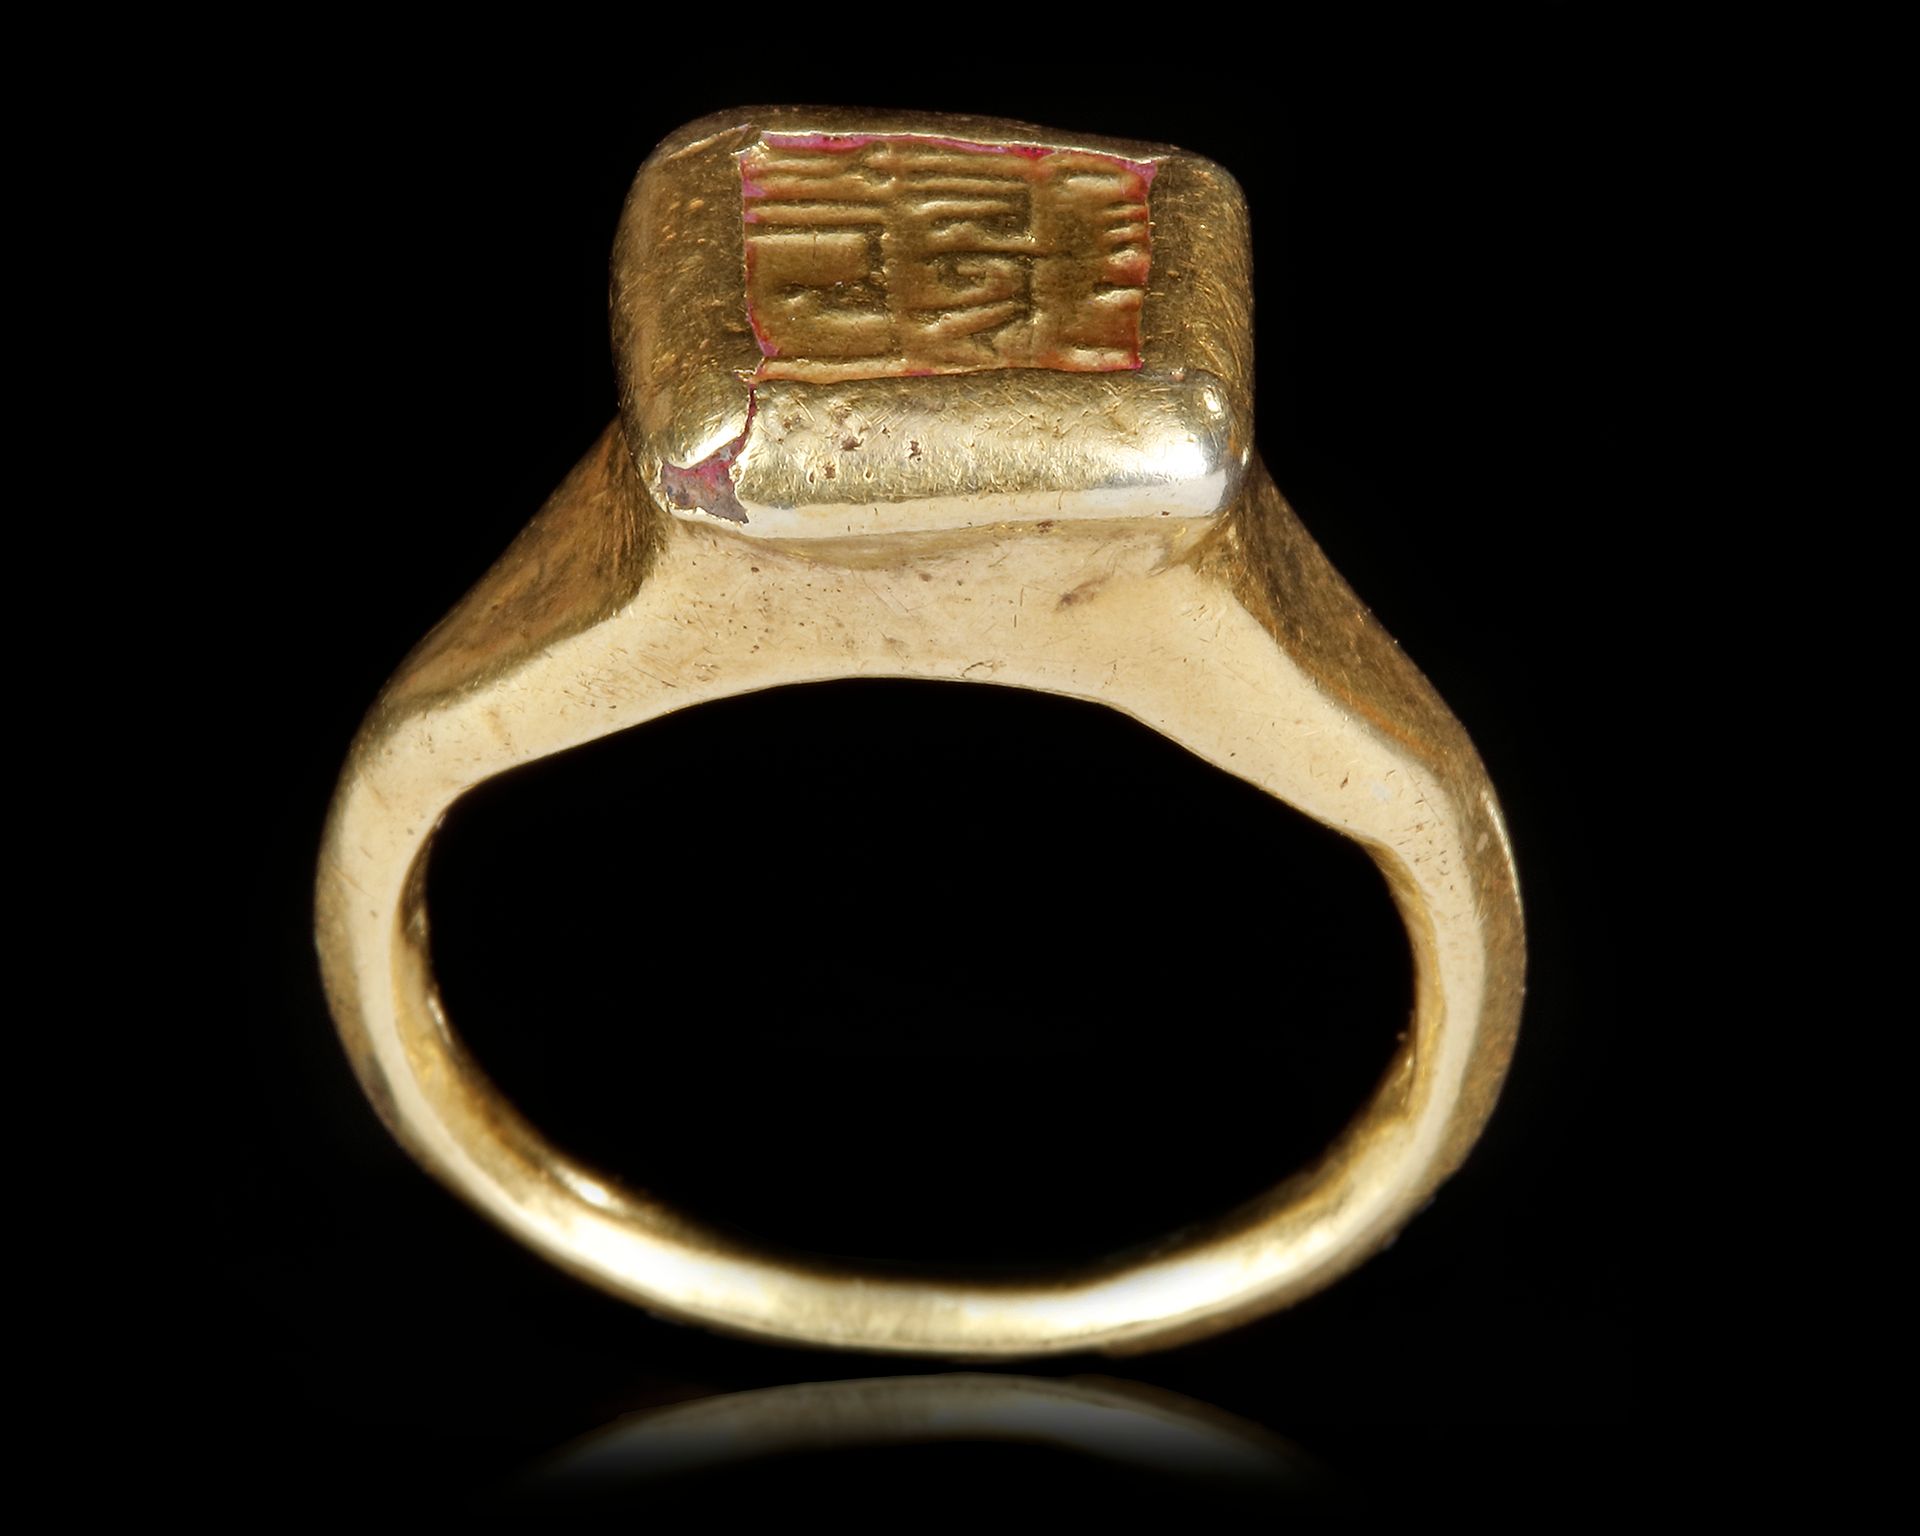 A FATIMID INSCRIBED GOLD RING, 12TH-13TH CENTURY Inscriptions

'There is no G-d &hellip;